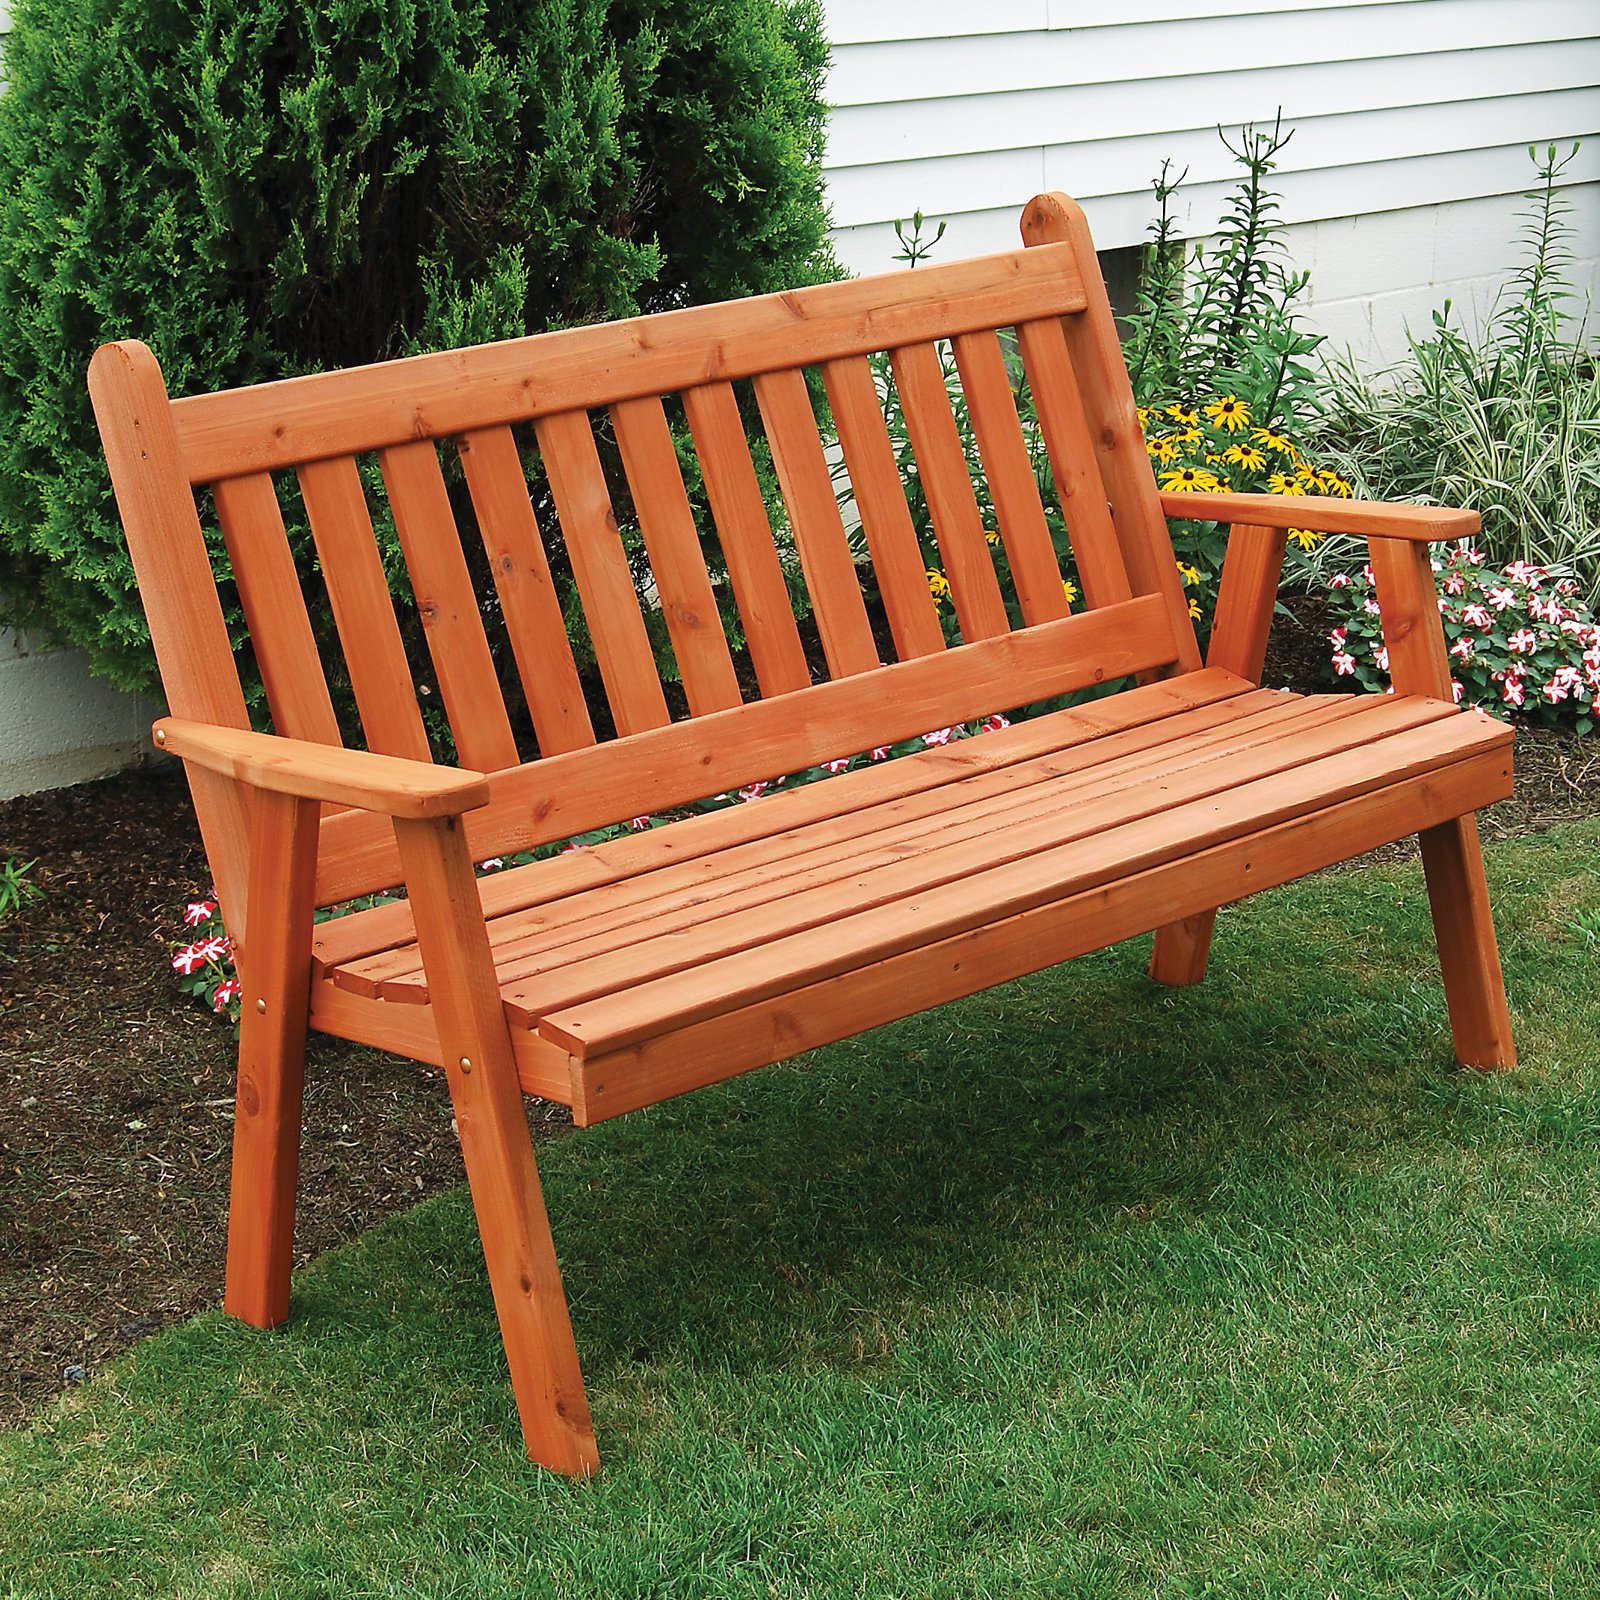 A &amp; L Furniture Western Red Cedar Traditional English Garden Bench - image 1 of 1